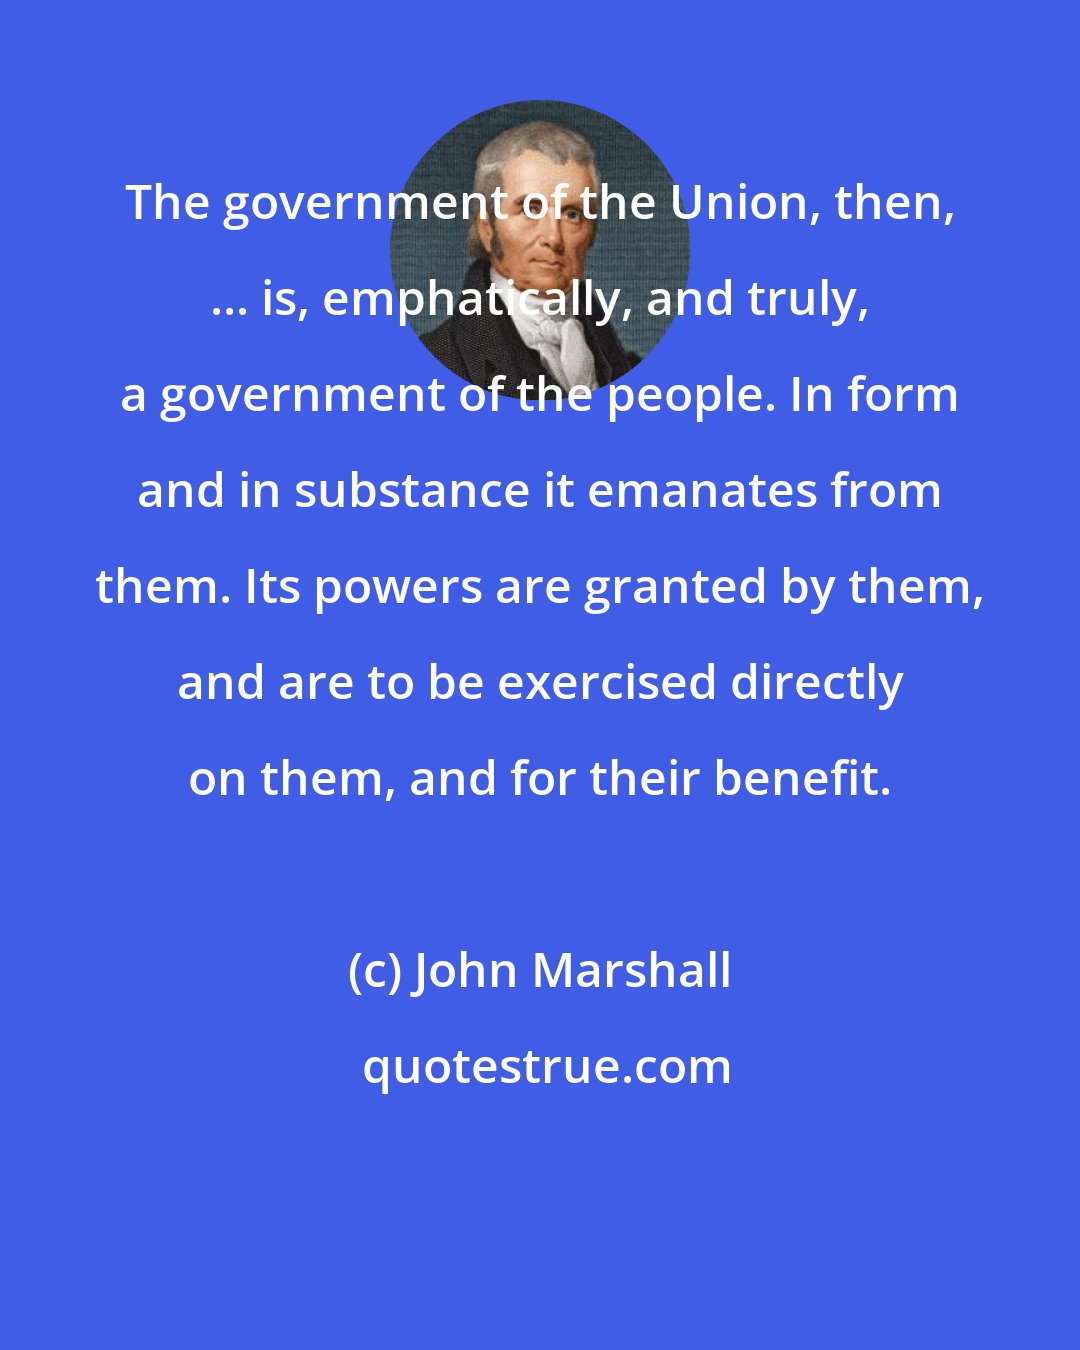 John Marshall: The government of the Union, then, ... is, emphatically, and truly, a government of the people. In form and in substance it emanates from them. Its powers are granted by them, and are to be exercised directly on them, and for their benefit.